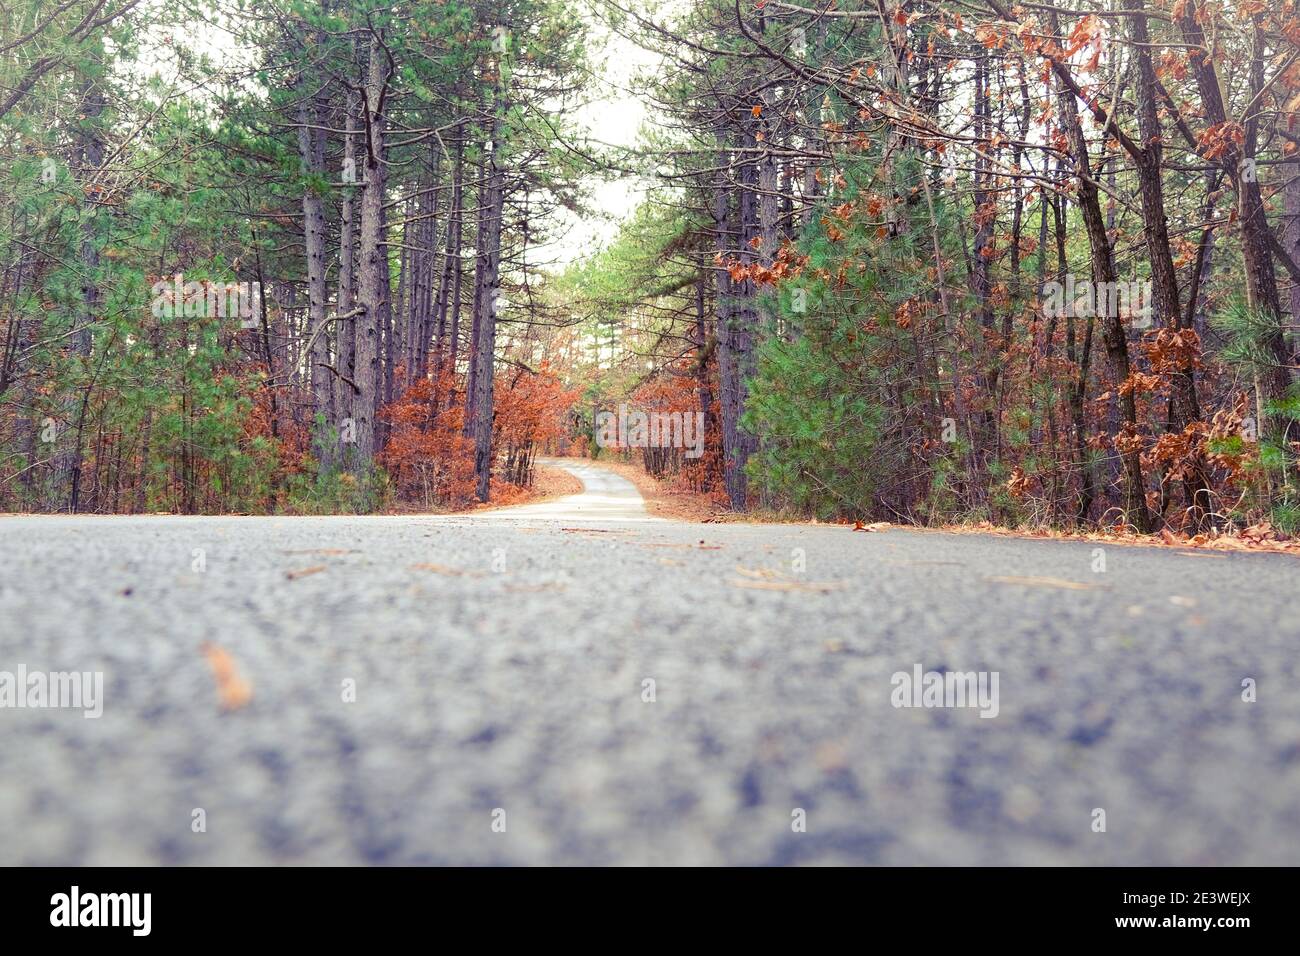 Road view from low angle with autumn colors. Dried leaves, trees and silence. Stock Photo